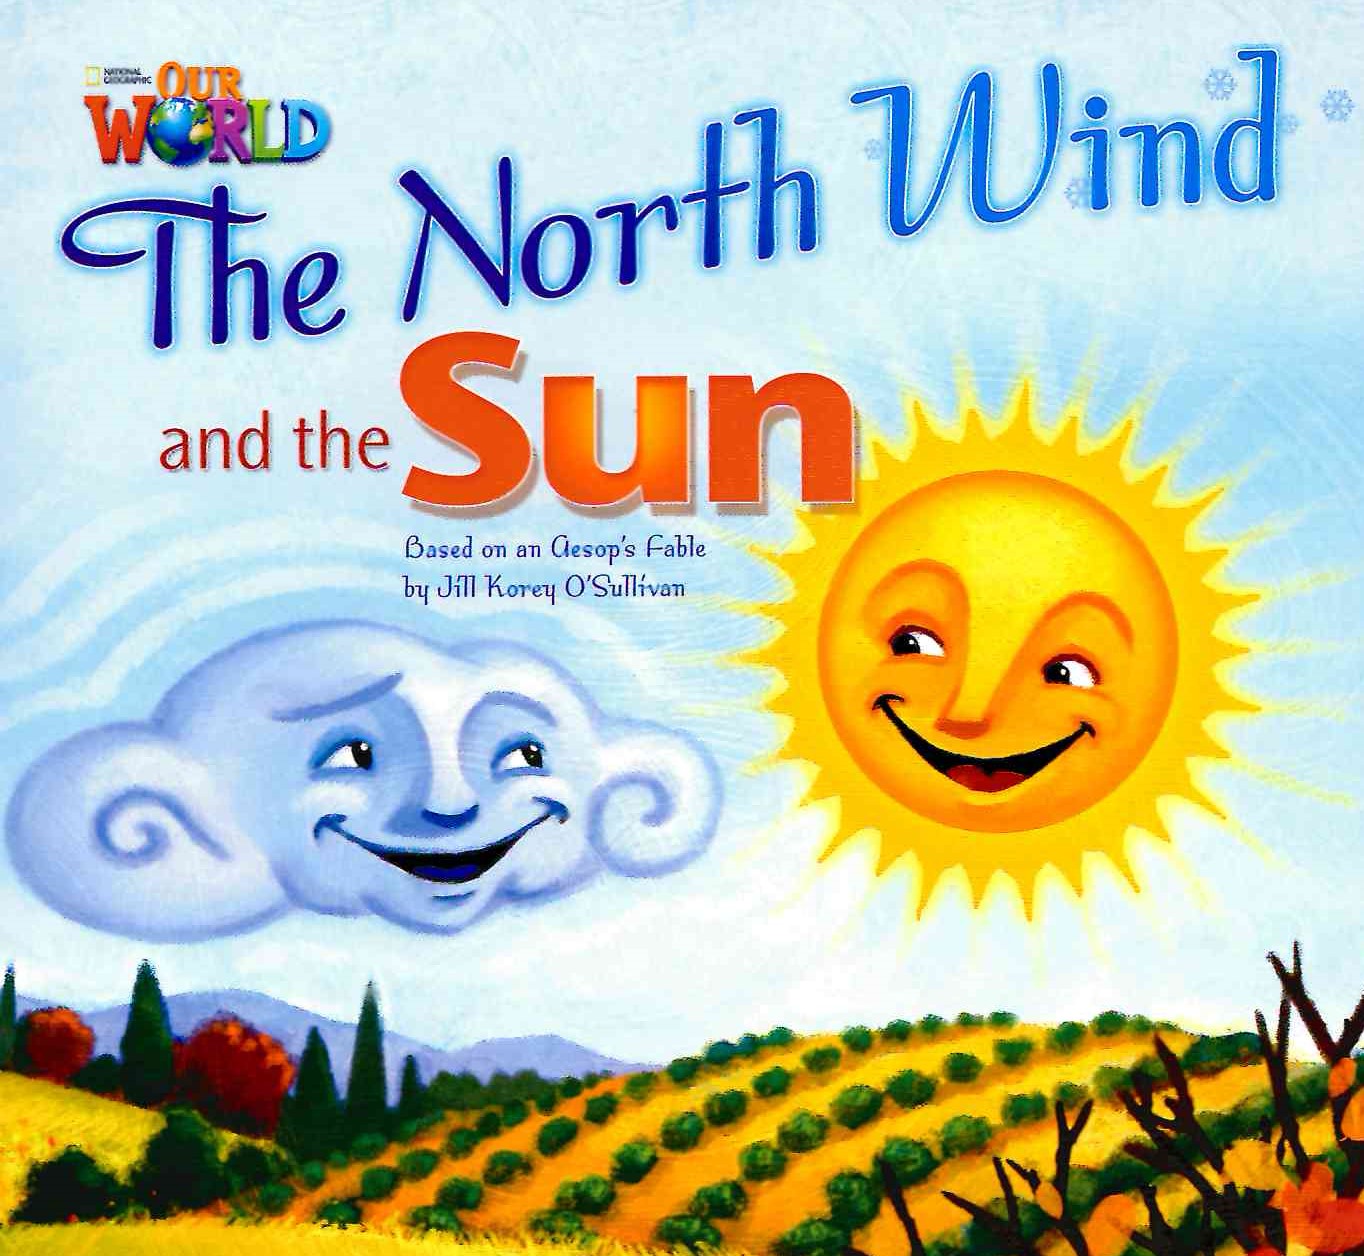 Our World 2 The North Wind and the Sun / Книга для чтения